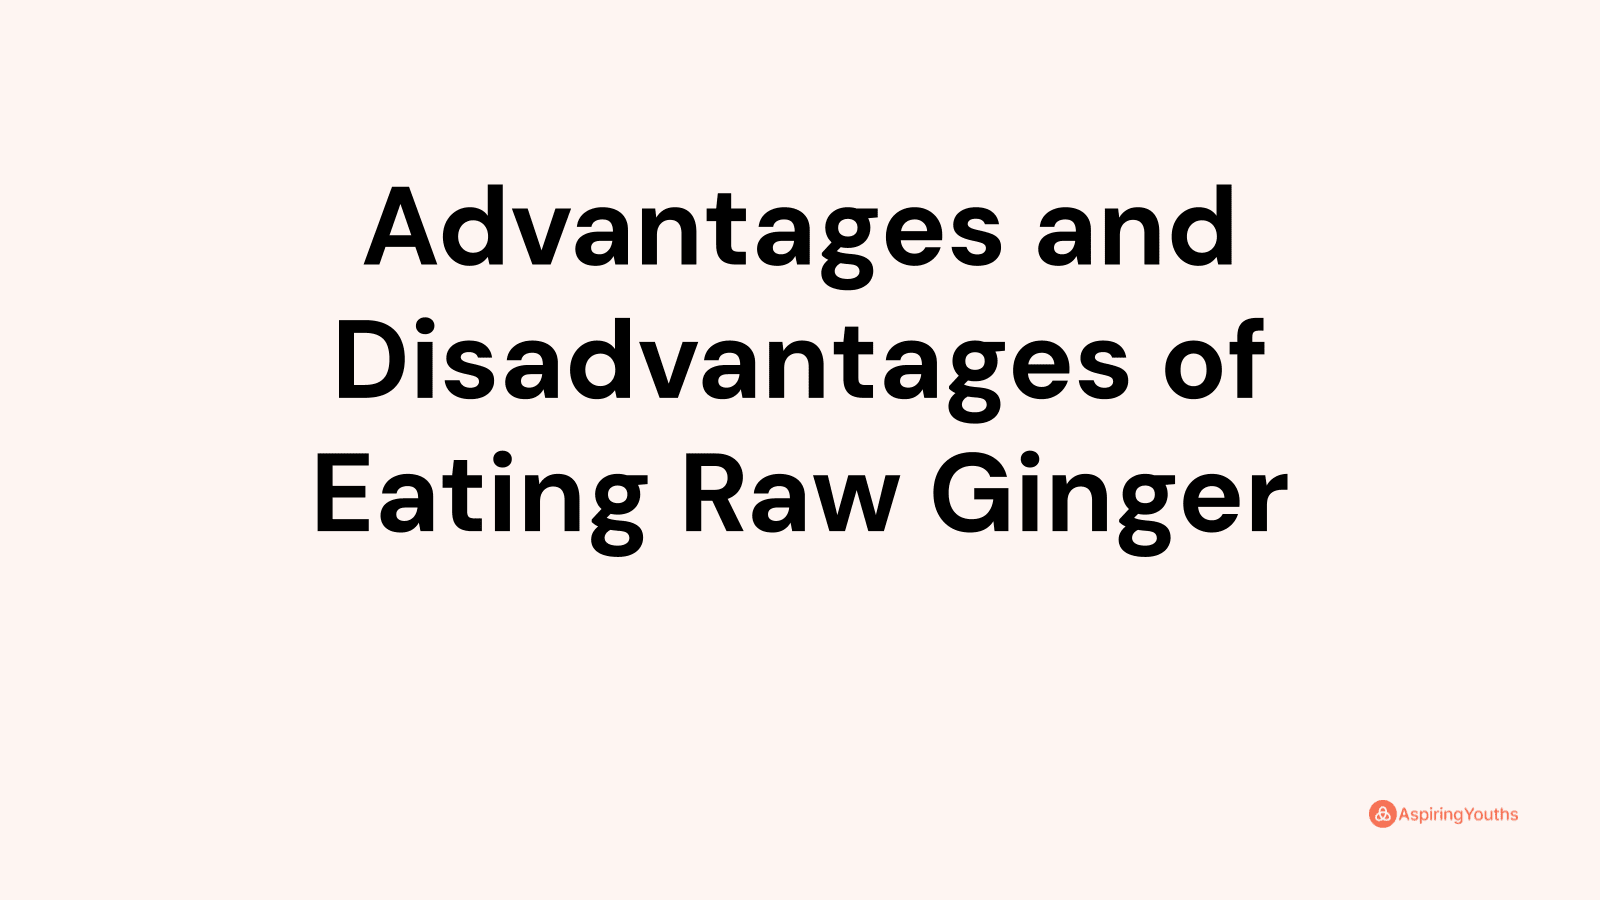 Advantages and disadvantages of Eating Raw Ginger